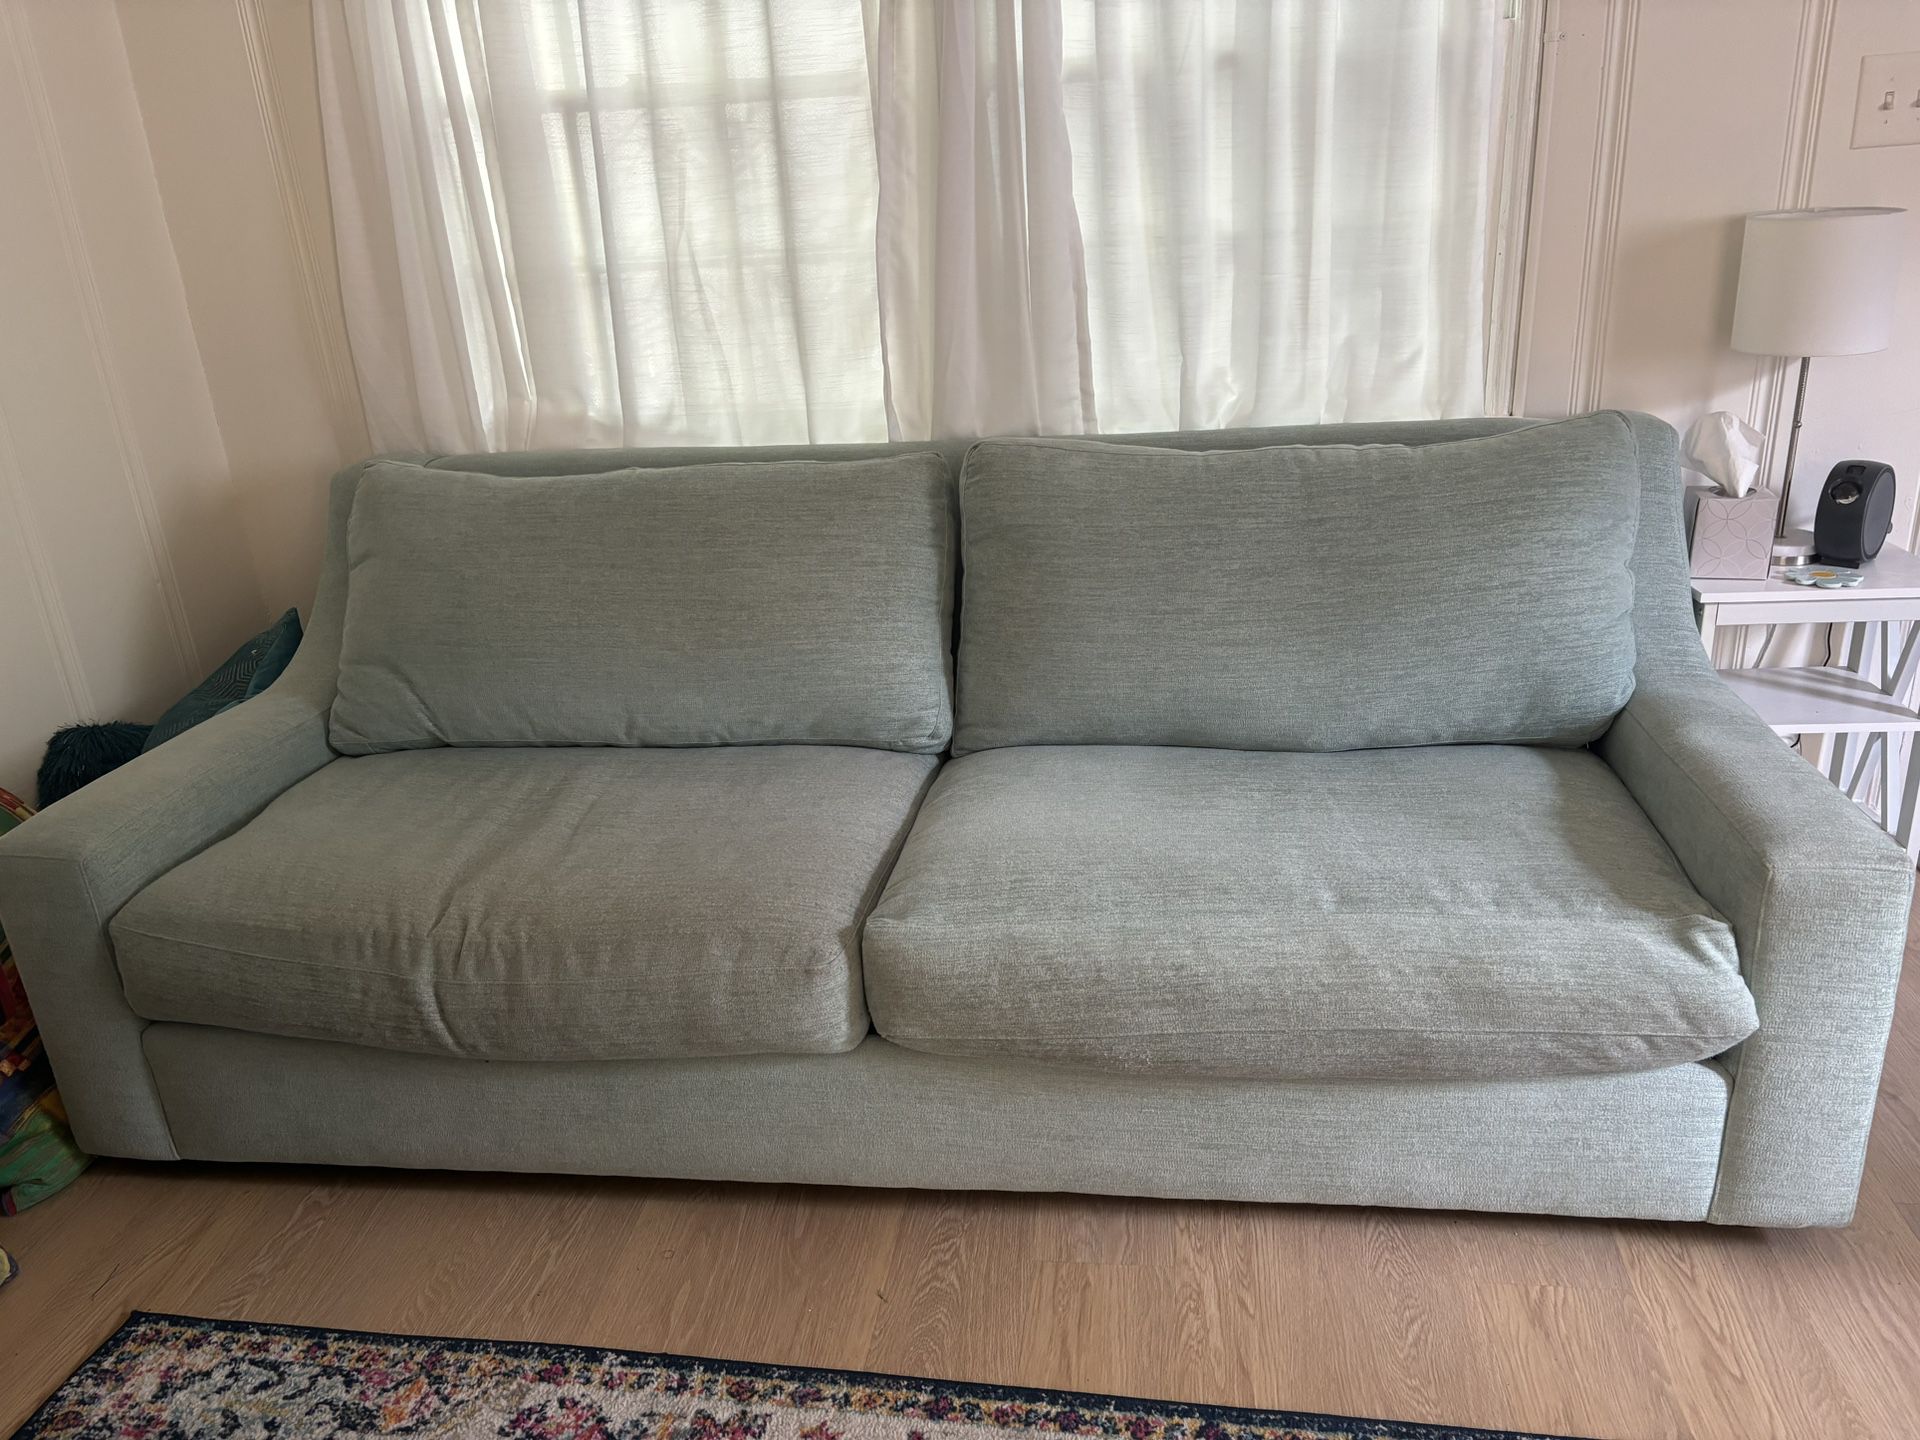 SUPER Comfortable Powder Blue Couch